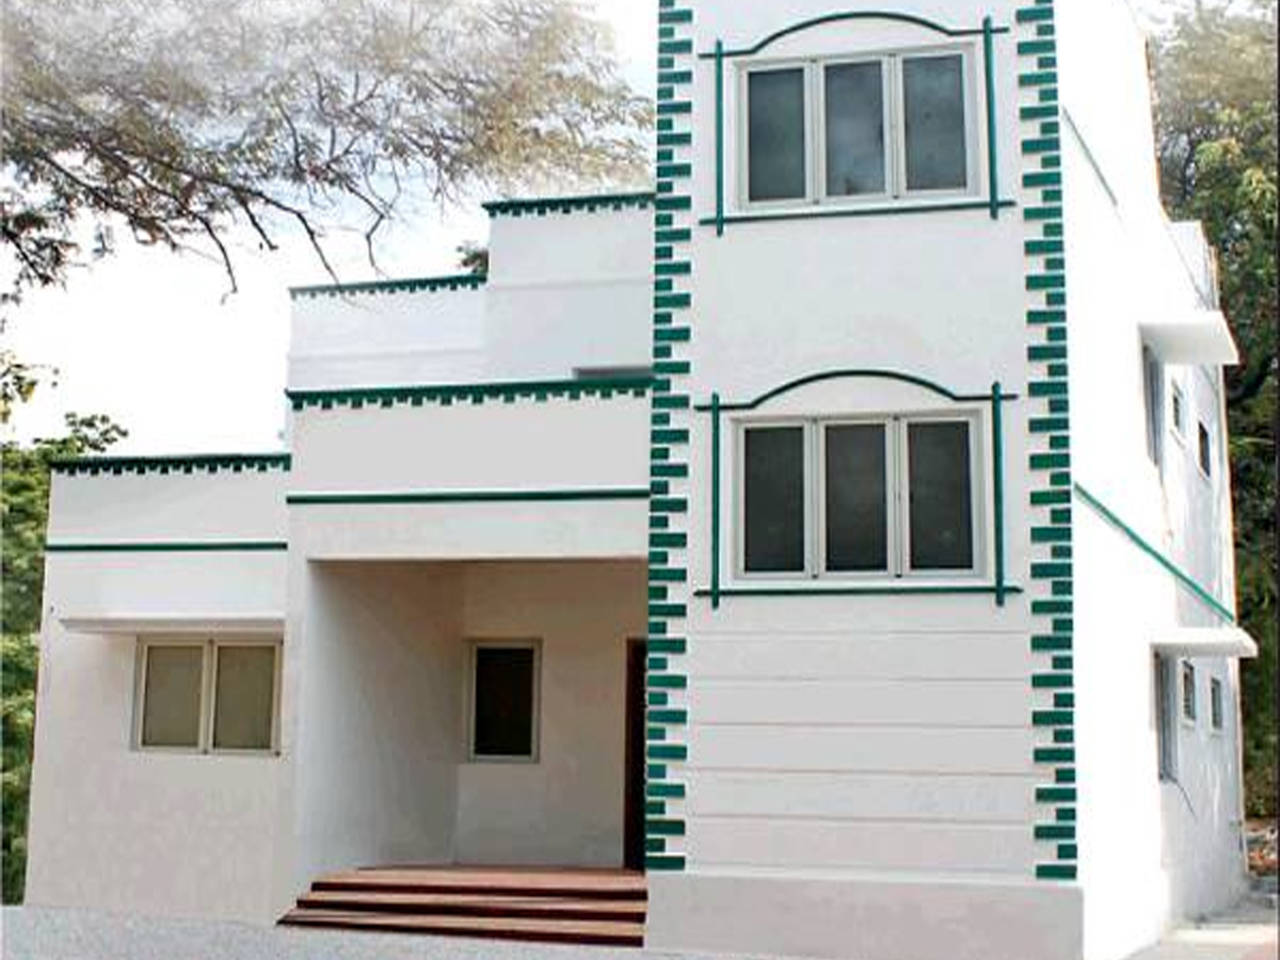 How Tamil Nadu goverment built a house using reinforced thermocol ...